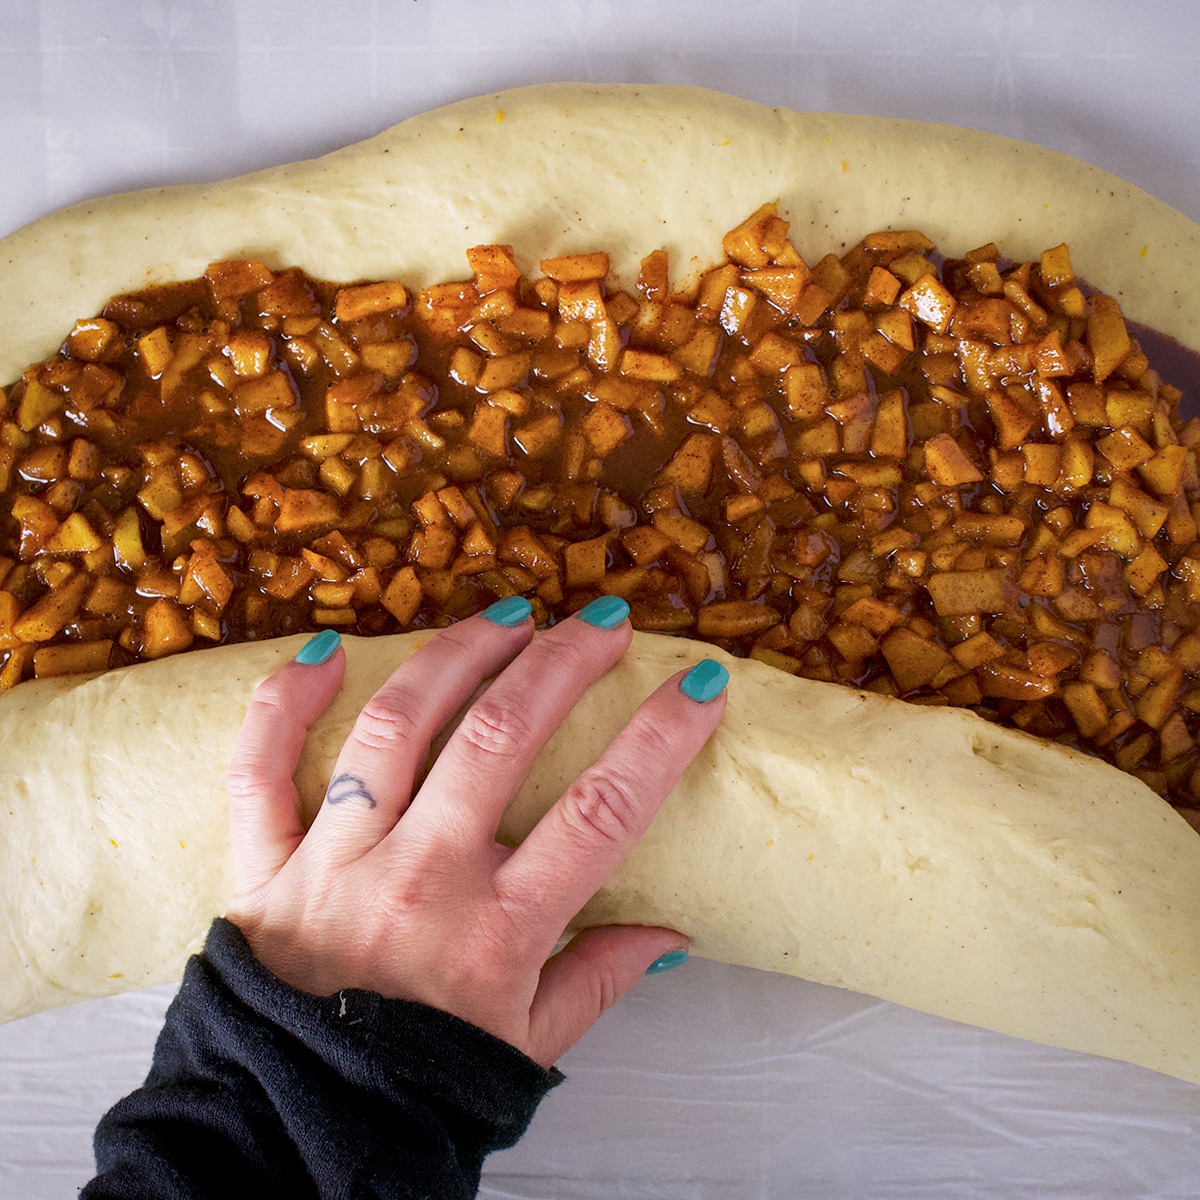 Someone using their hands to roll up a log of dough filled with apple fritter filling.